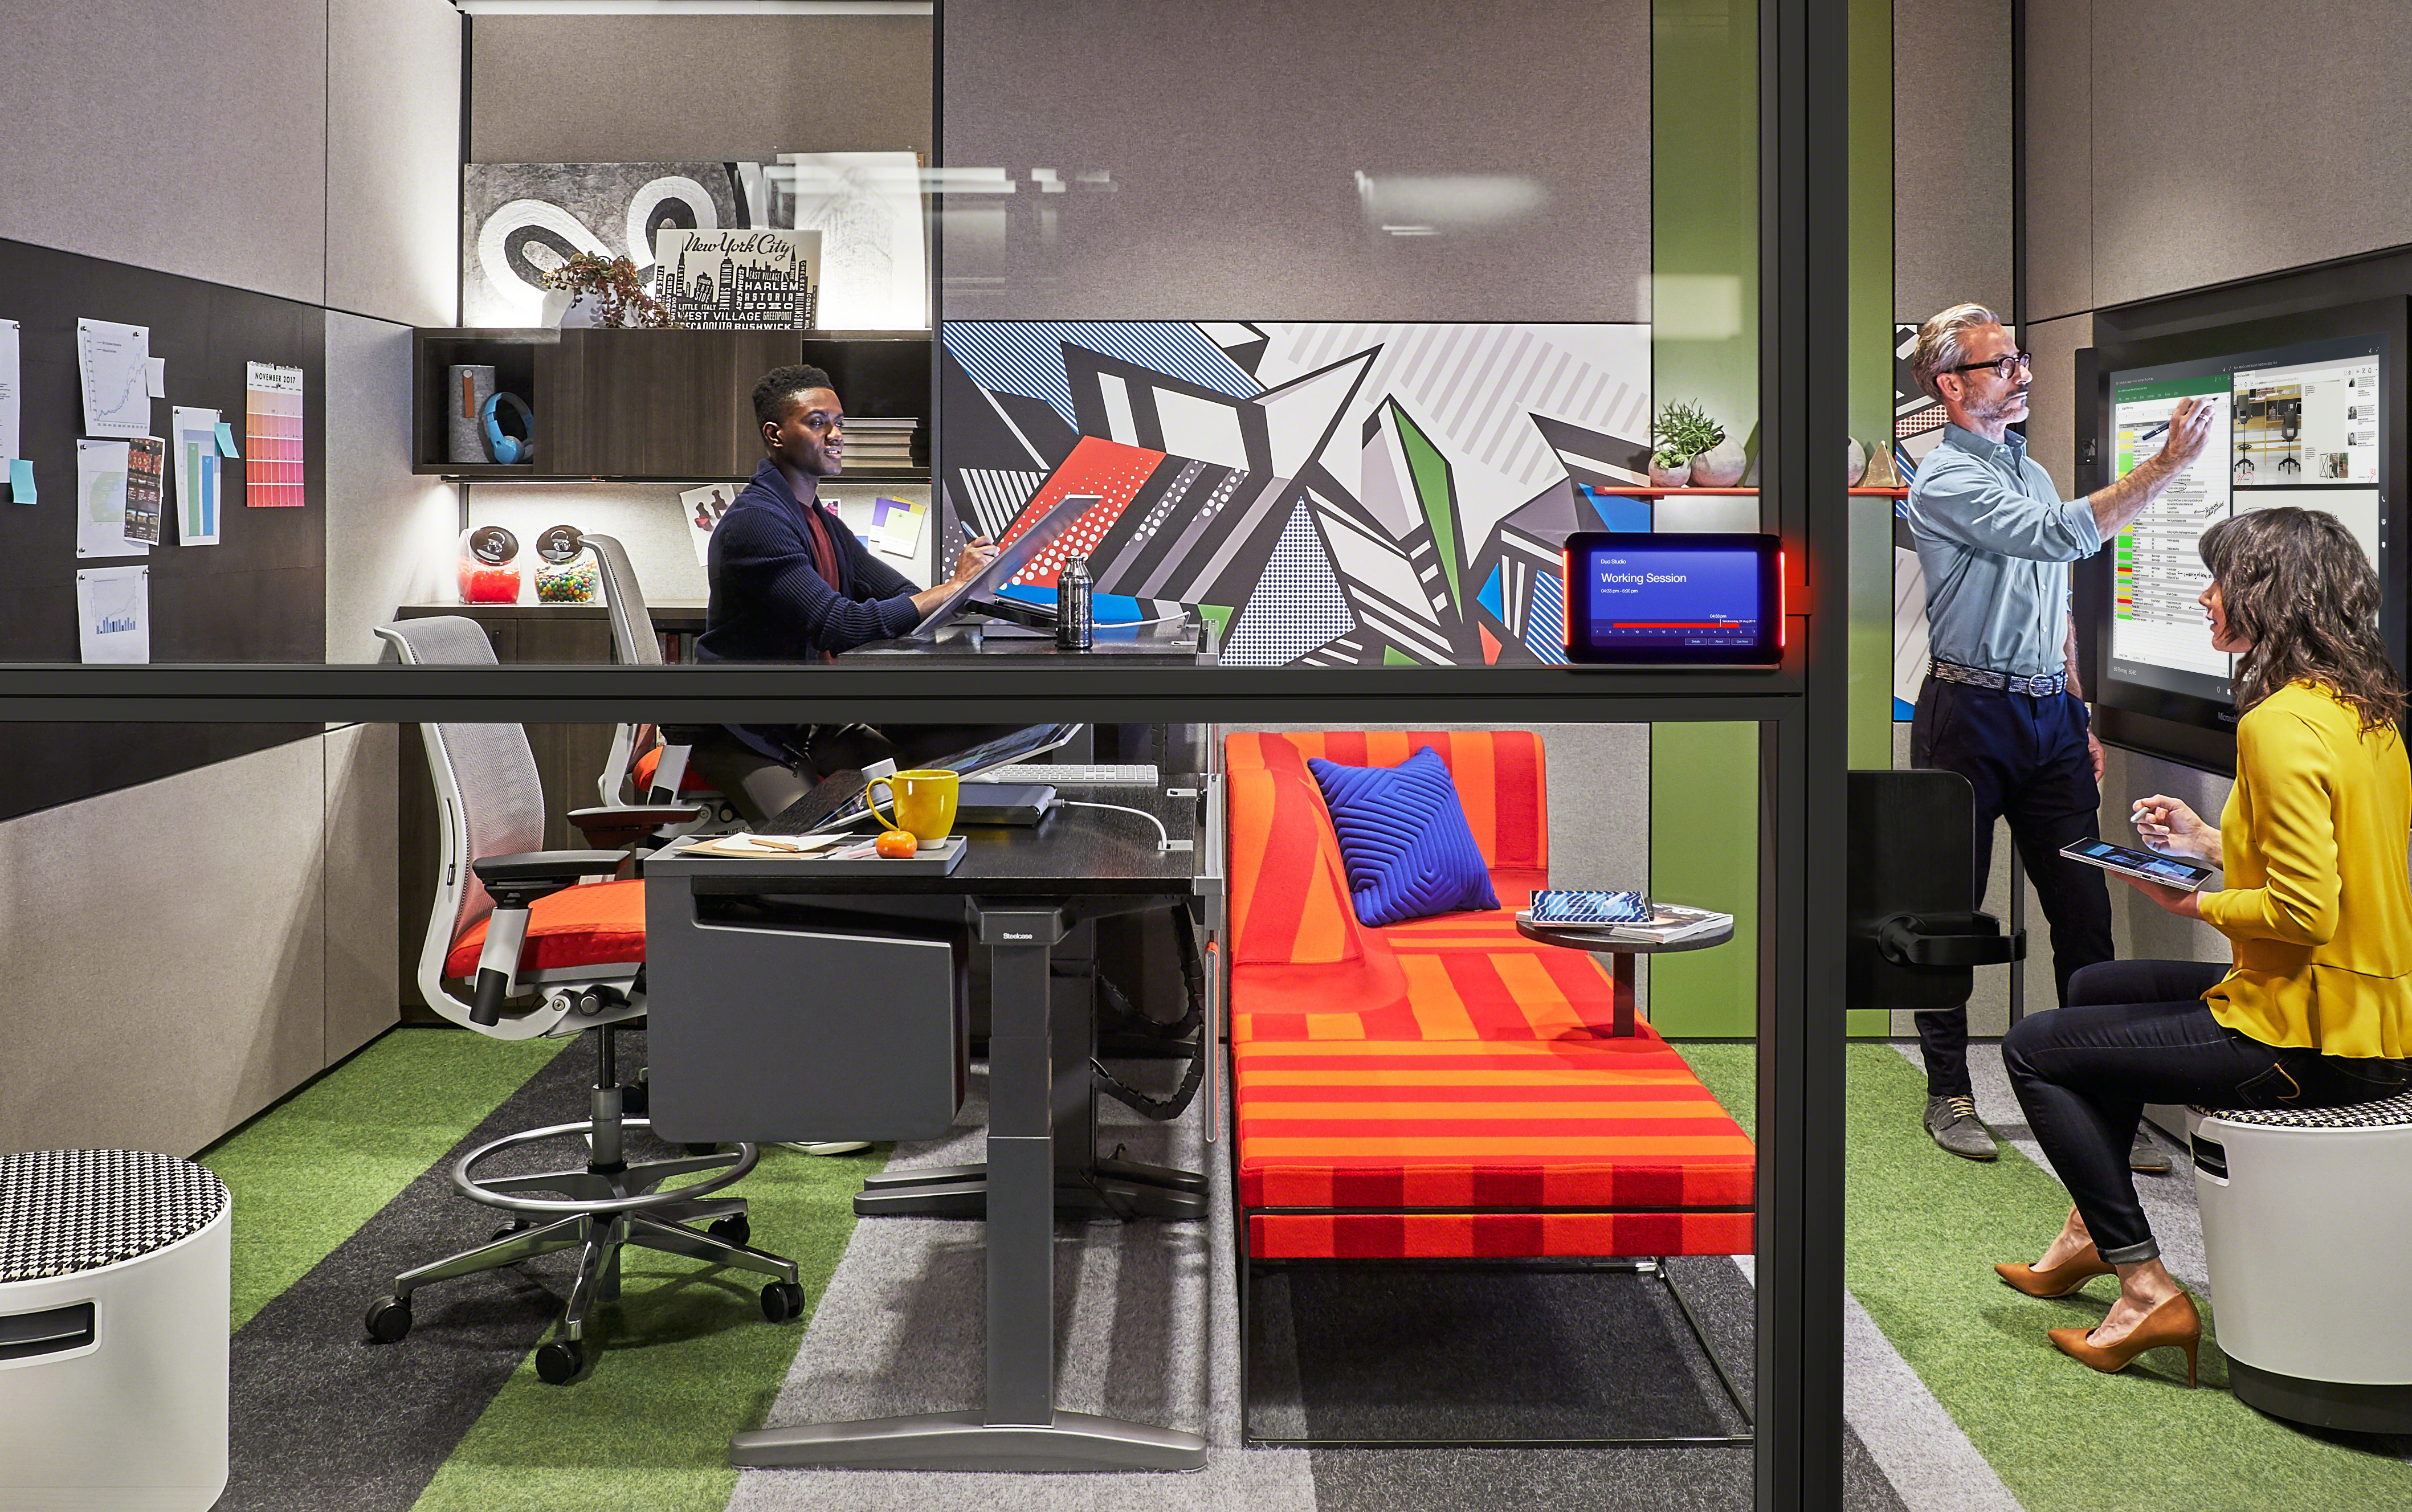 Duo Studio: Working in pairs is an essential behavior of creativity. This space enables two people to co-create shoulder-to-shoulder, while also supporting individual work with Microsoft Surface Studio. It includes a lounge area to invite others in for a quick creative review with Surface Hub or to put your feet up and get away without going away.